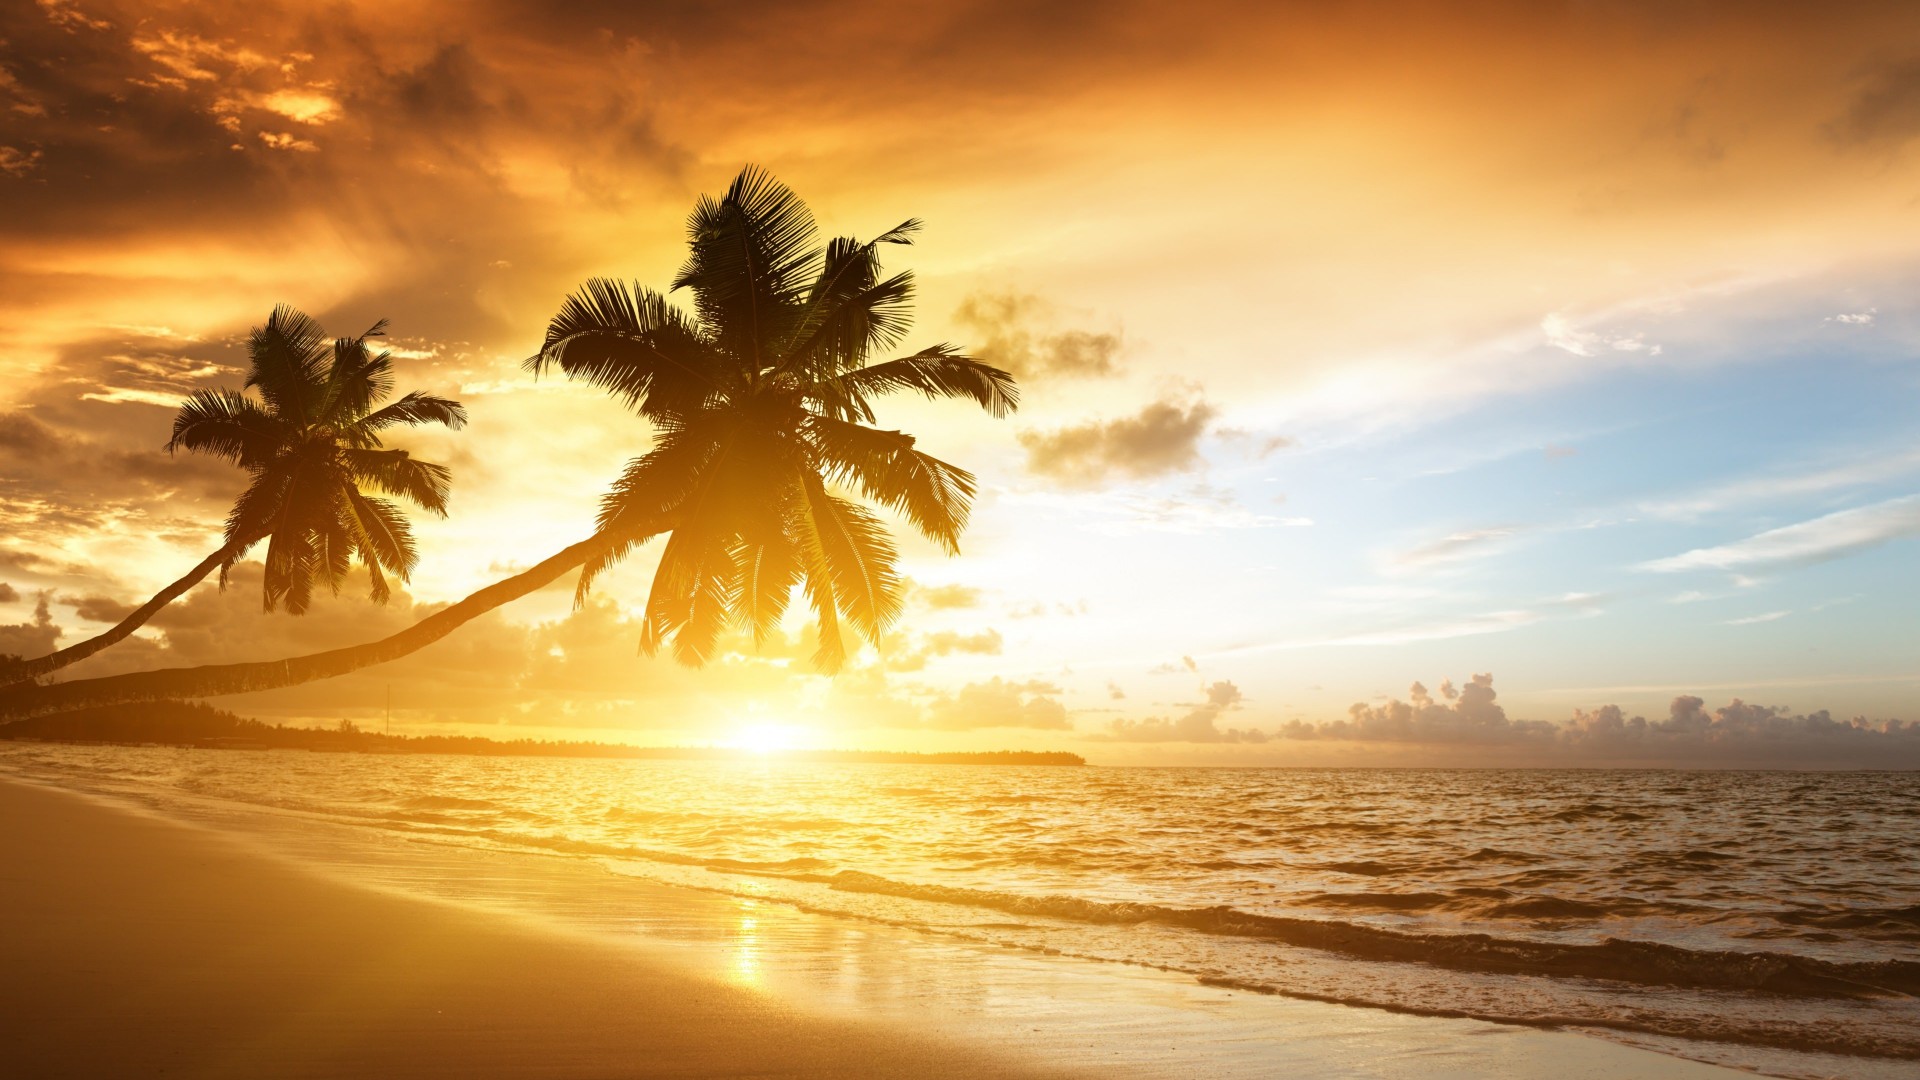 Beach With Palm Trees At Sunset Wallpaper for Desktop 1920x1080